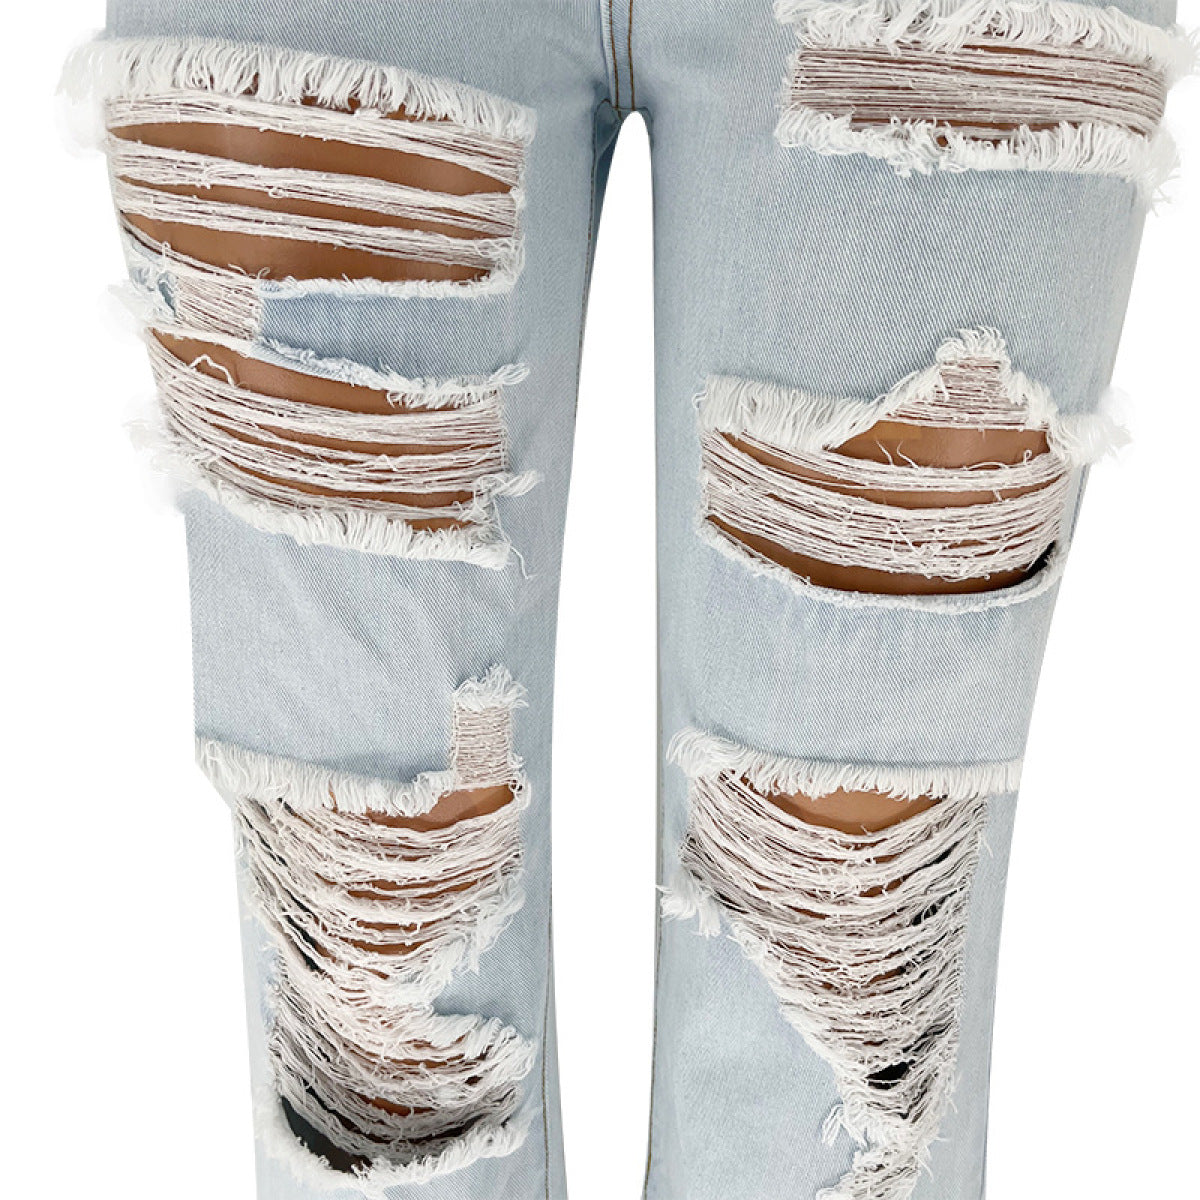 High-Waist Ripped Single-Breasted Straight-Leg Flared Jeans